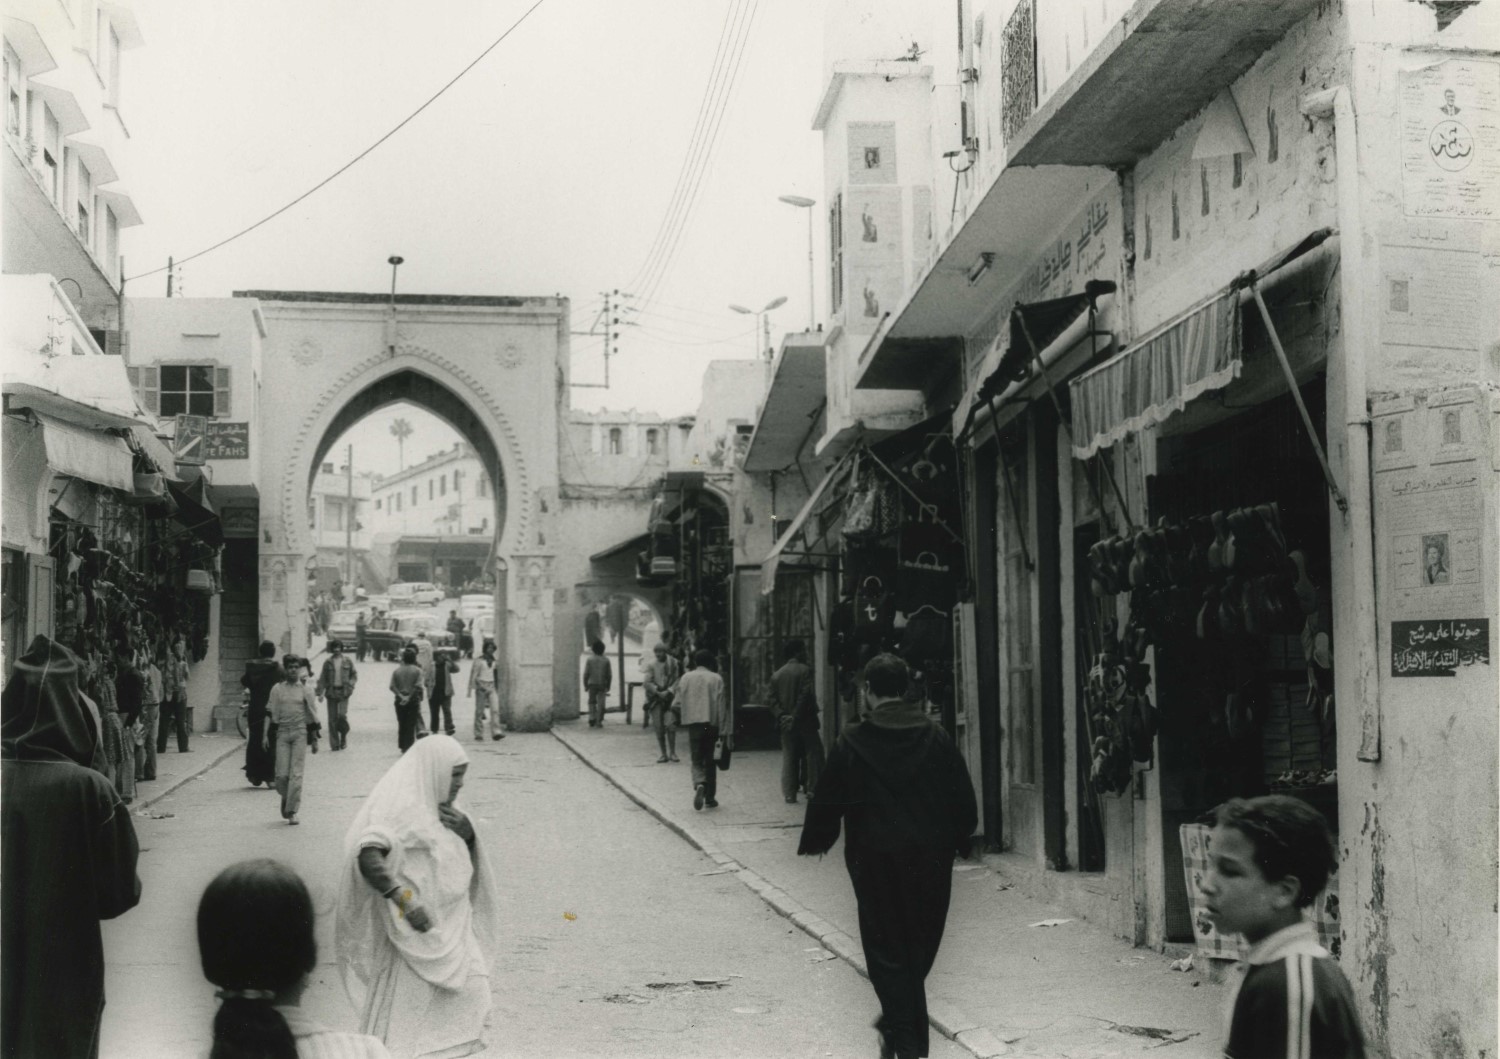 View of Bab Fahs toward Souk Barra, also known as the Grand Socco